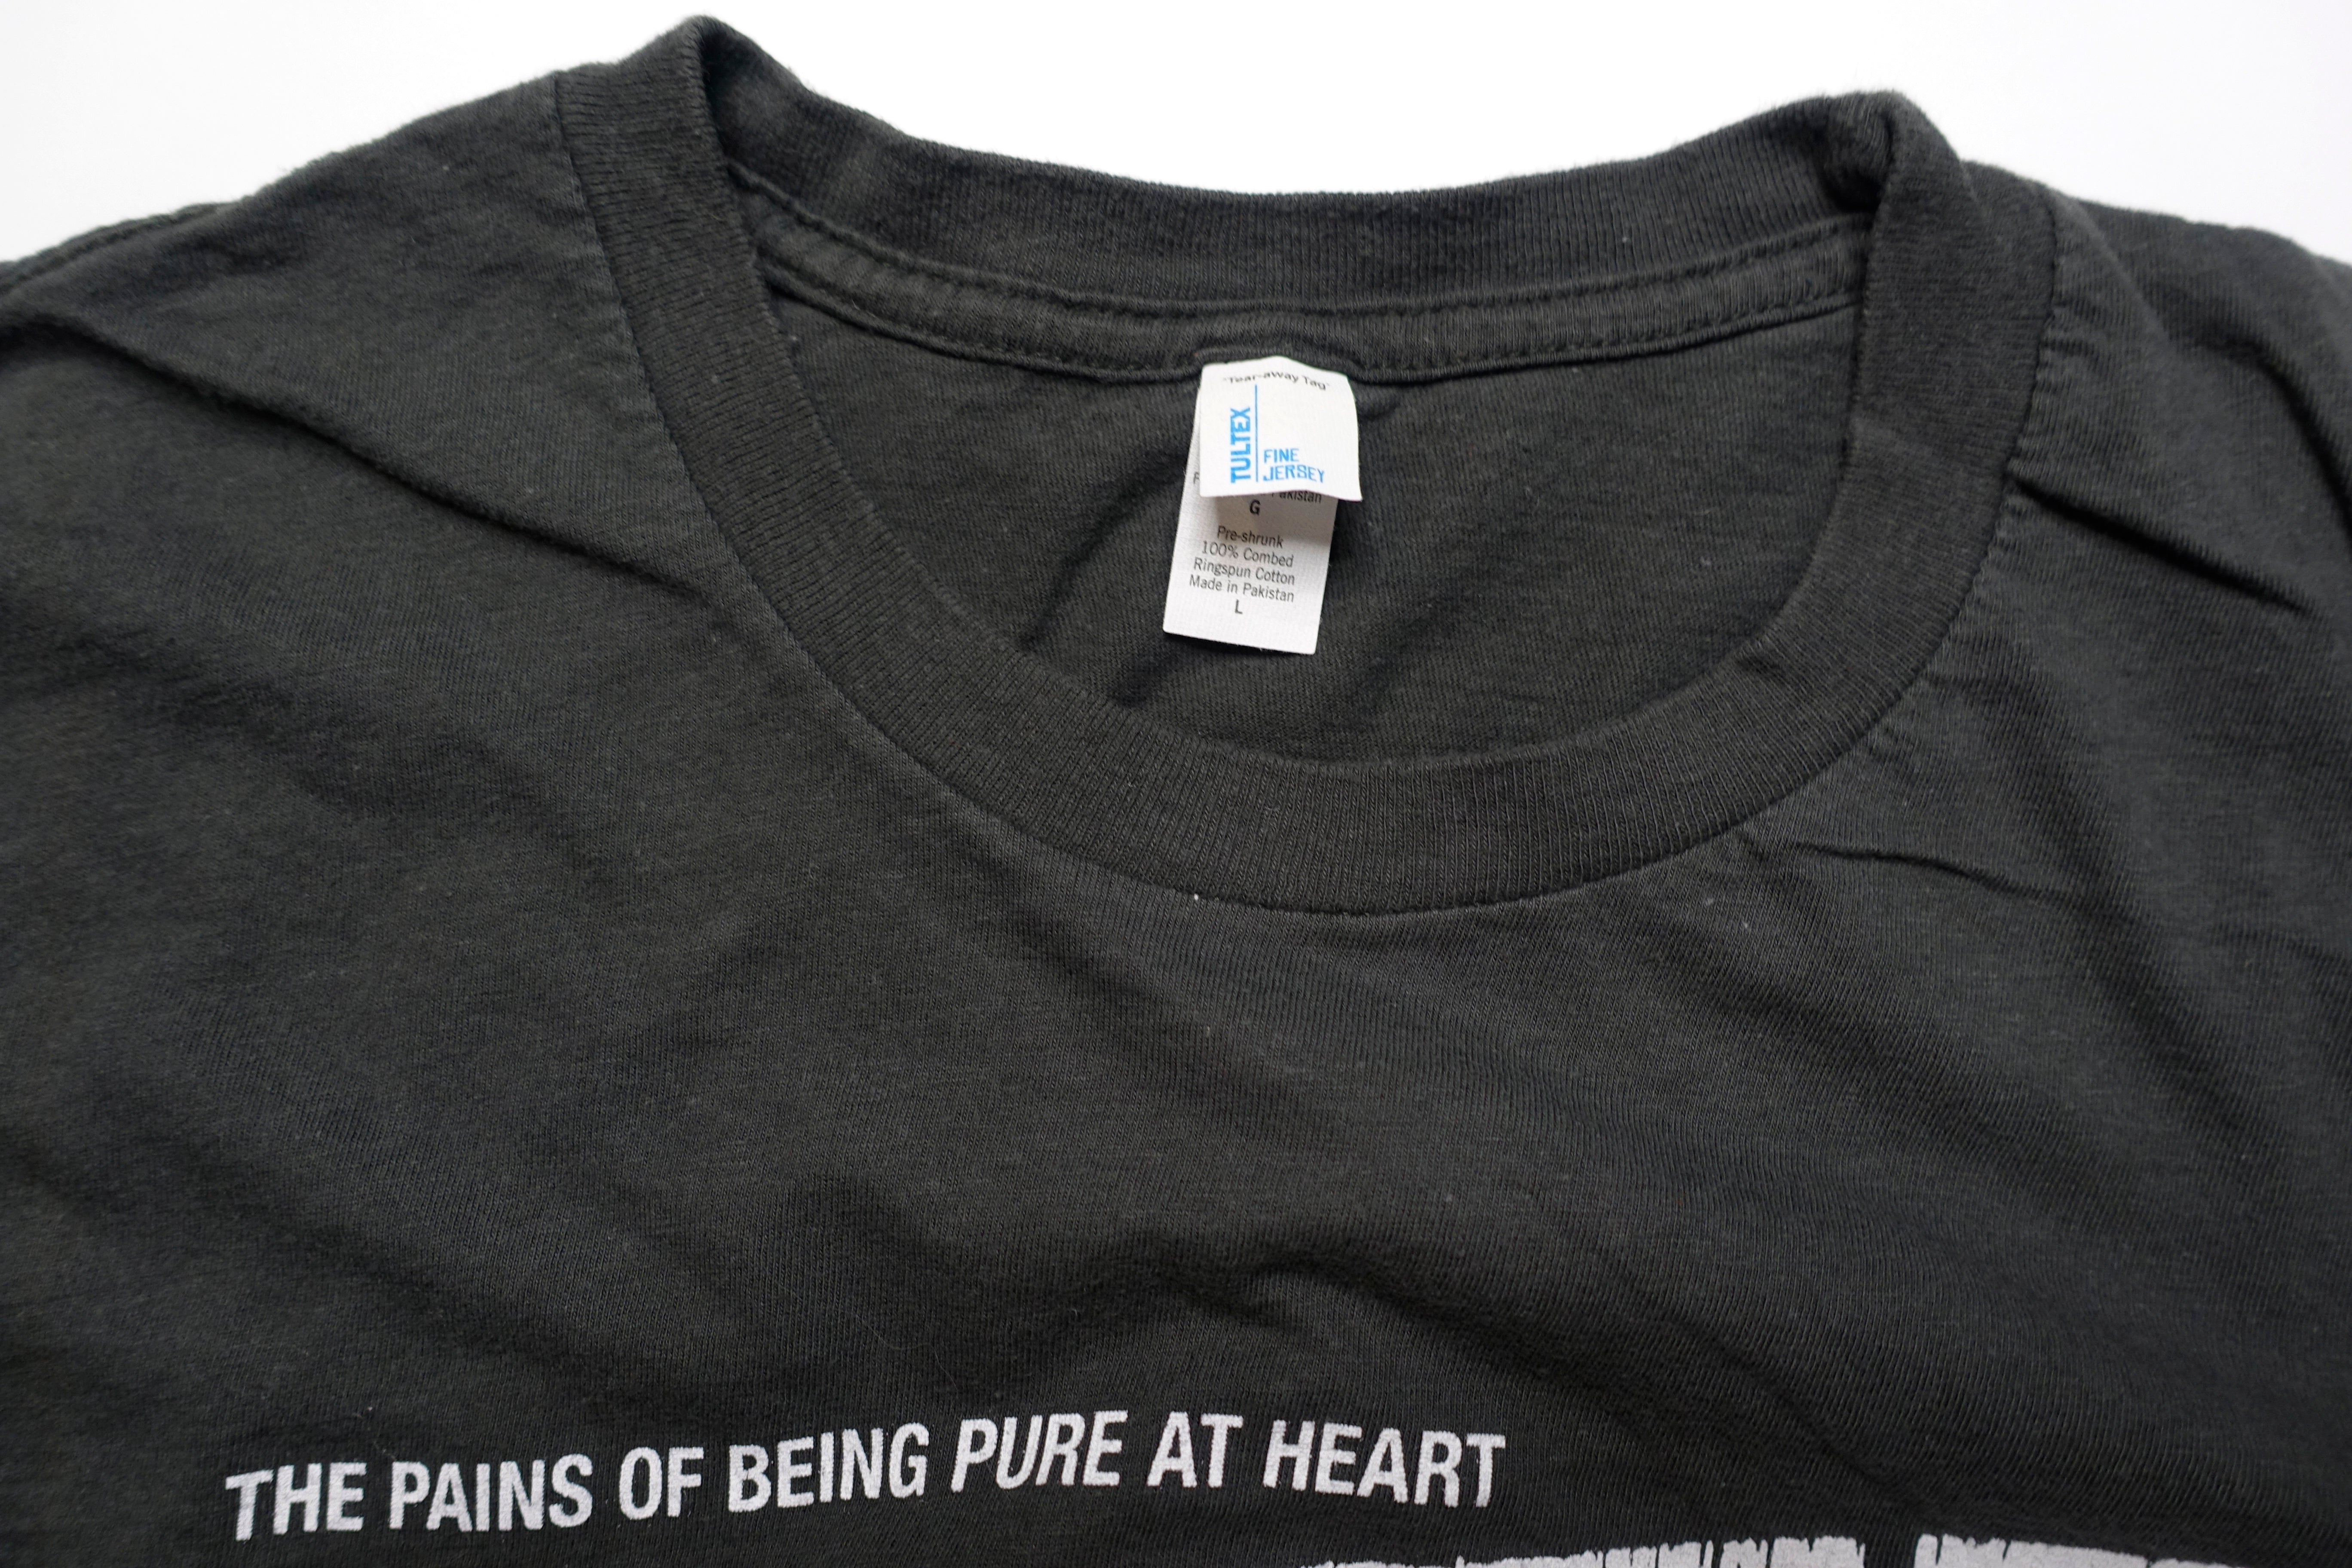 Pains Of Being Pure At Heart - Higher Than The Stars 2009 Tour Shirt Size Large